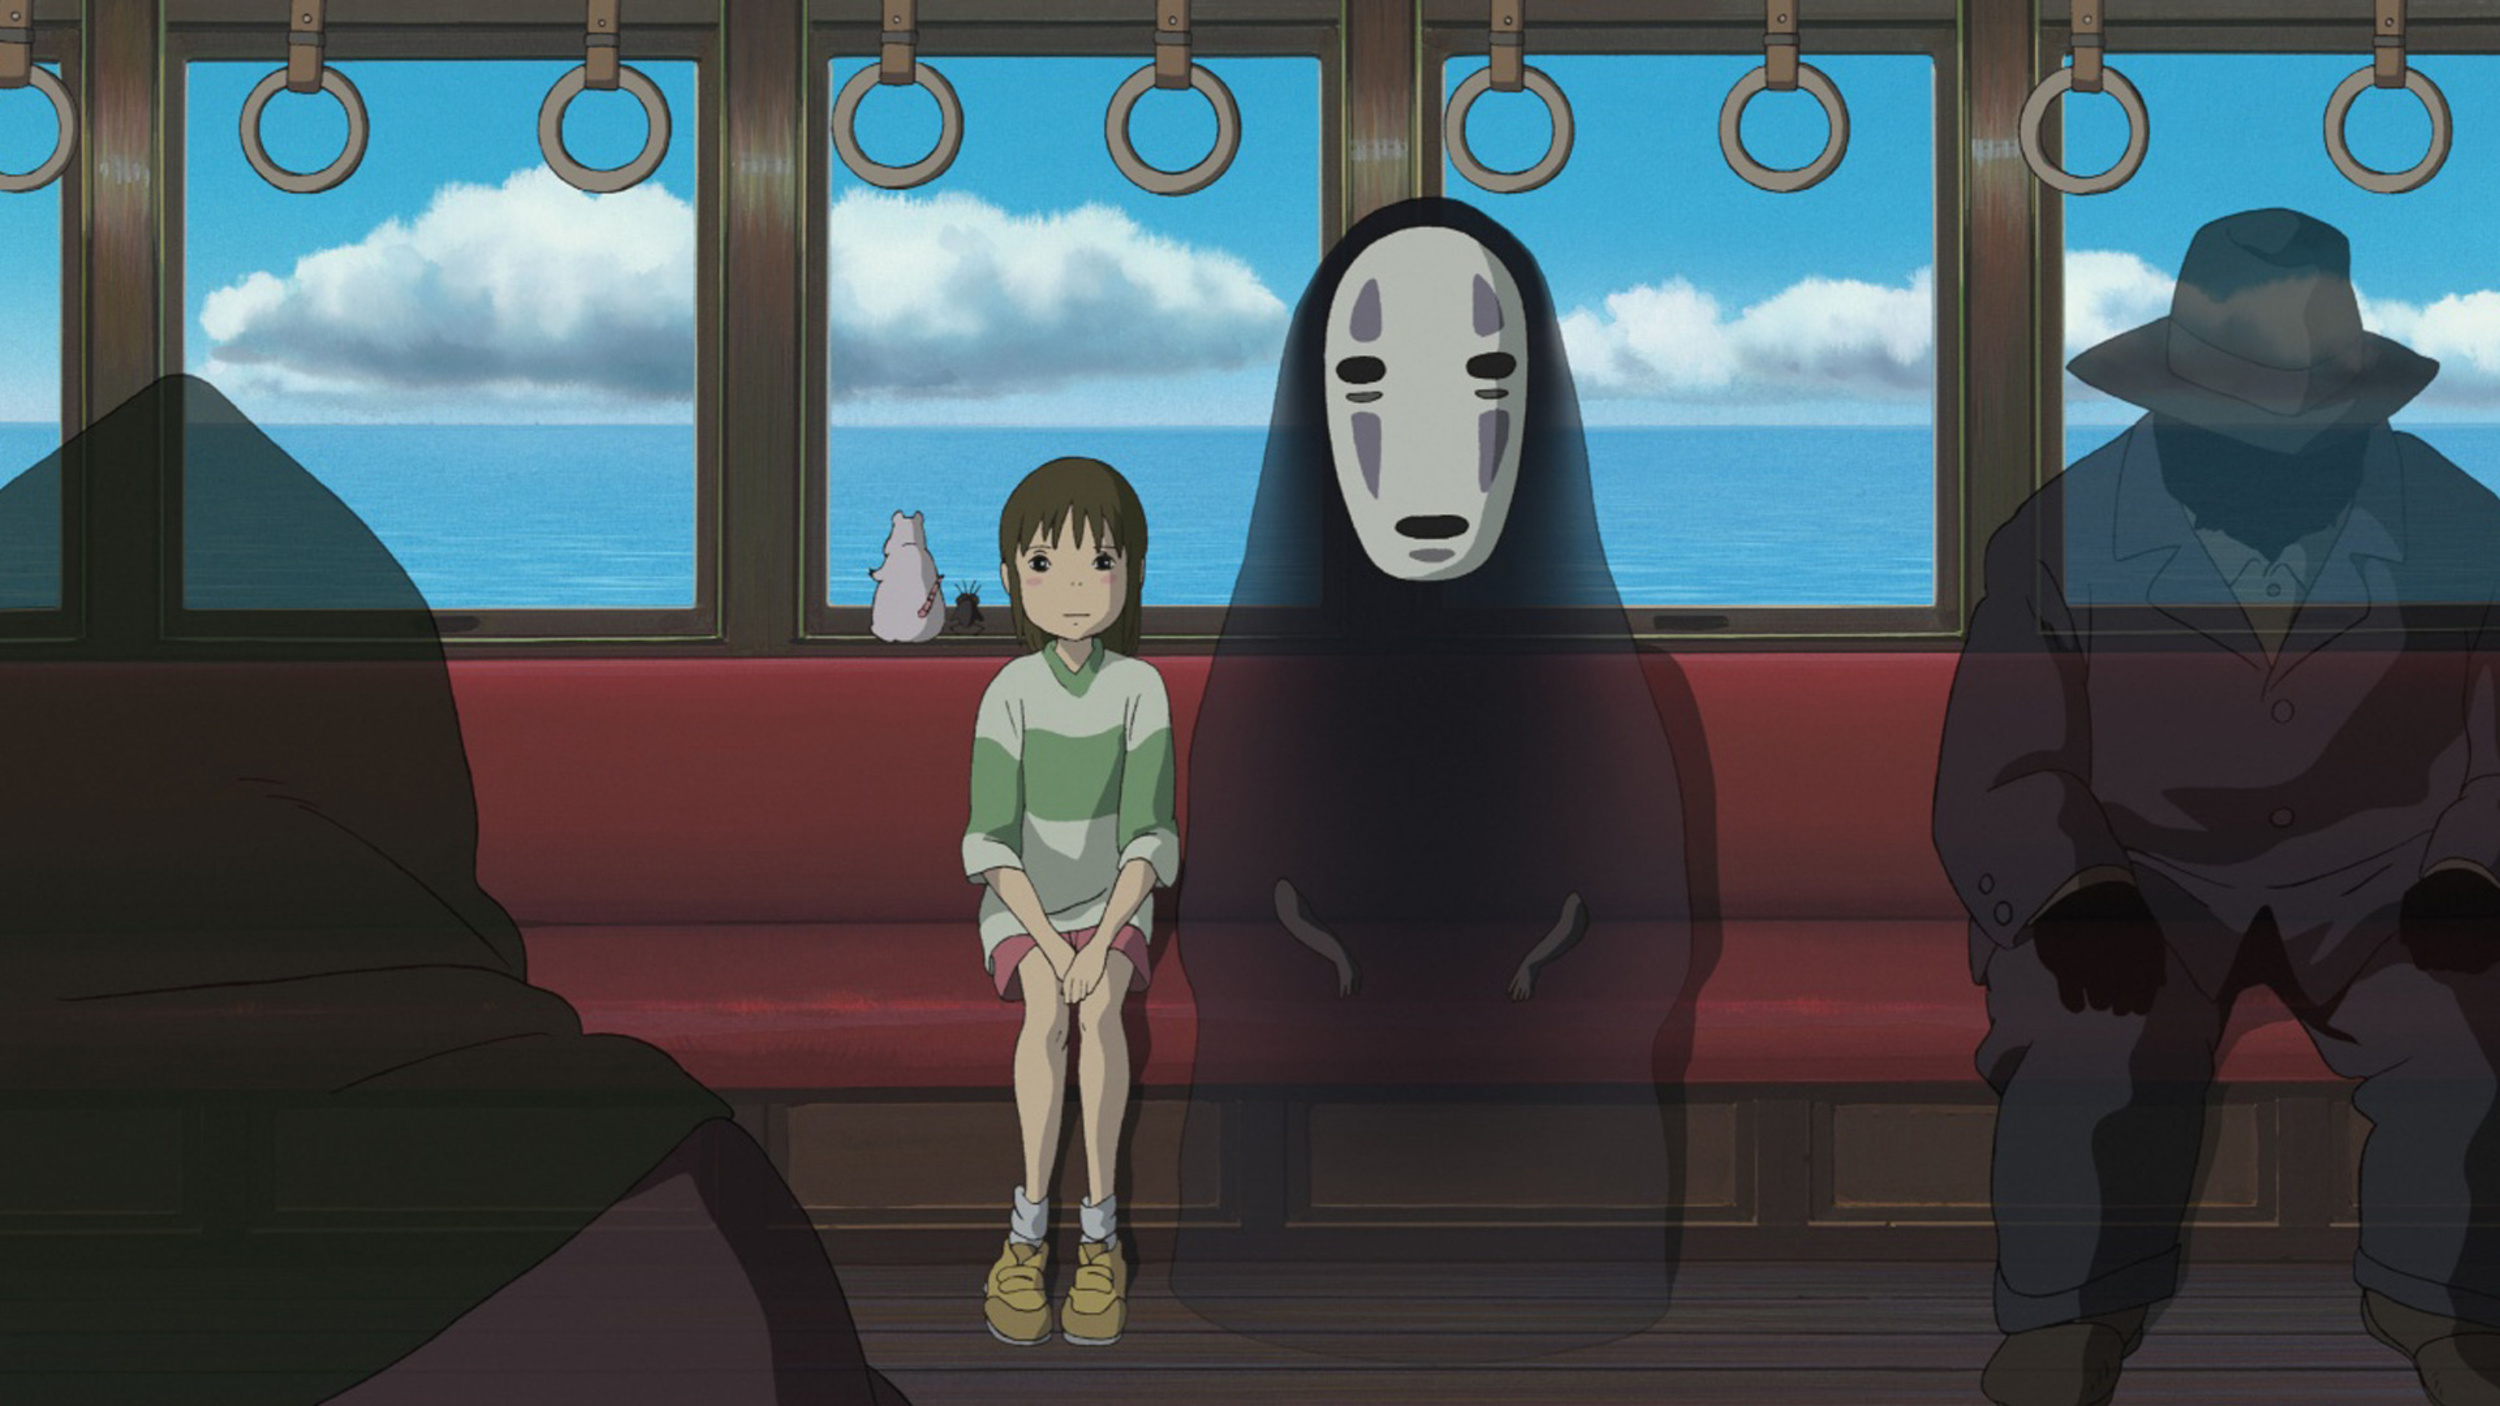 <p>Hayao Miyazaki’s enchanting masterwork concerns a young girl’s journey through the spiritual world of a fantastical hot-springs bathhouse. Of the many odd apparitions she meets along the way, the most memorable is a masked ghost known as No-Face, who has a peculiar habit of consuming other characters. Perhaps more than any other work in his impressive oeuvre, “Spirited Away” drifts along to a gentle dream logic; it’s a miraculous film of constant discovery that speaks to something curious and ineffable inside all of us.</p><p>You may also like: <a href='https://www.yardbarker.com/entertainment/articles/25_bad_films_by_legendary_directors_111423/s1__39135411'>25 bad films by legendary directors</a></p>